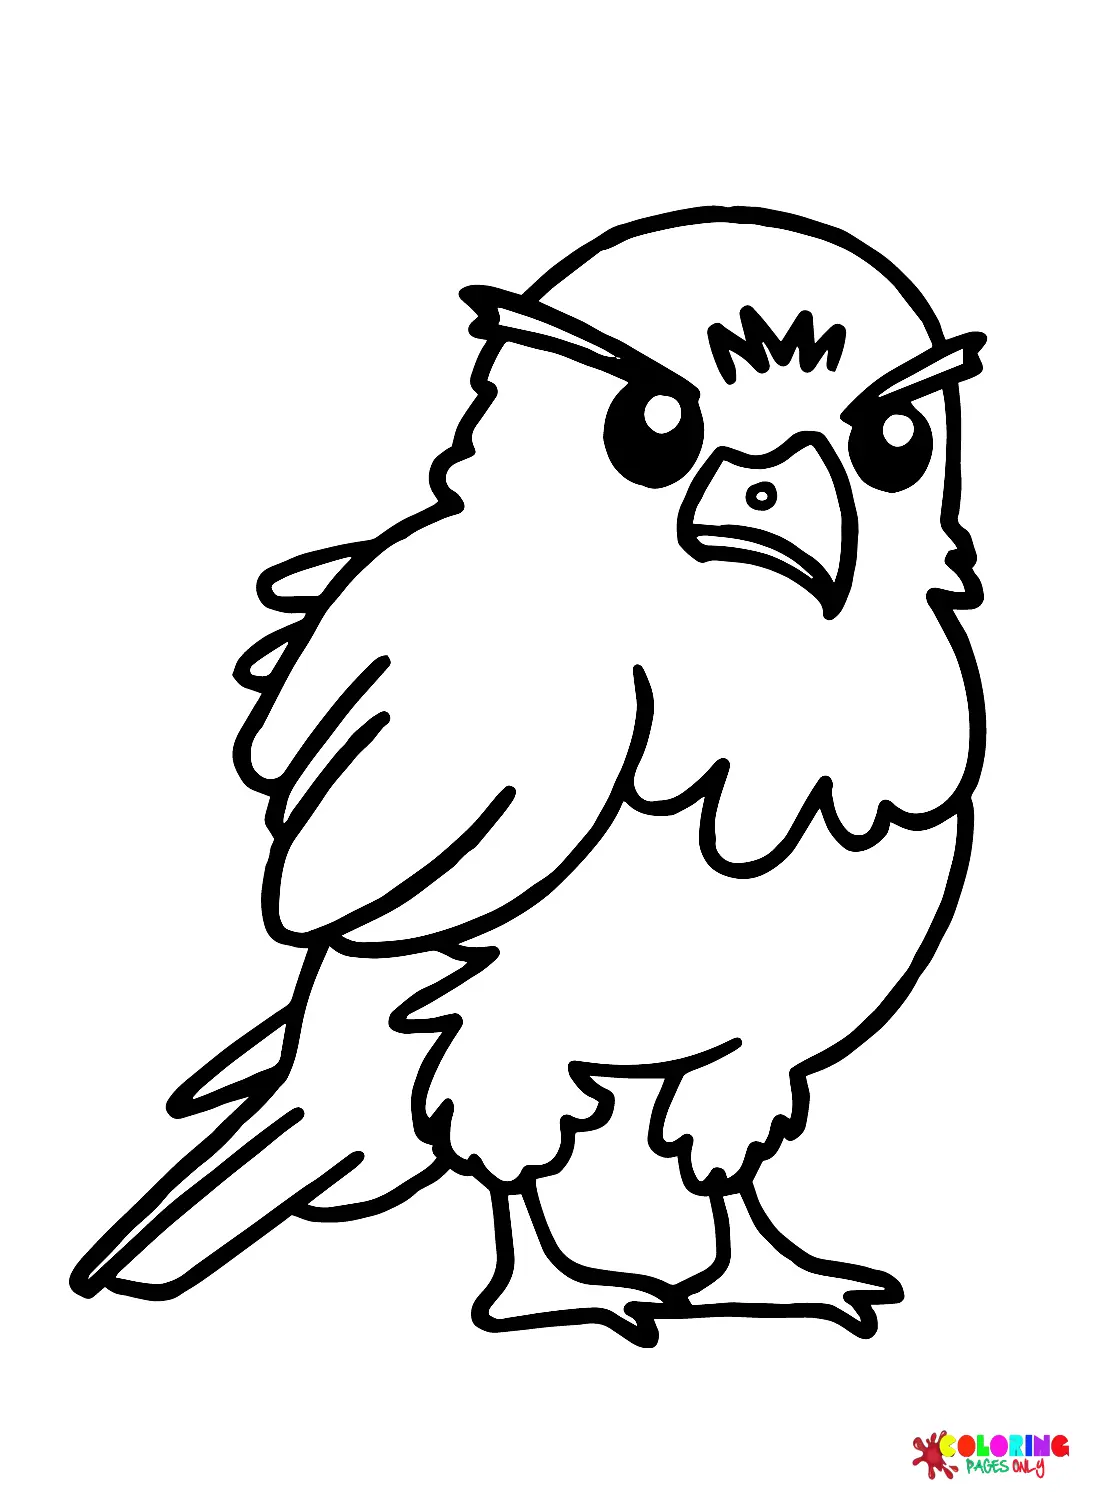 Falcon Coloring Pages